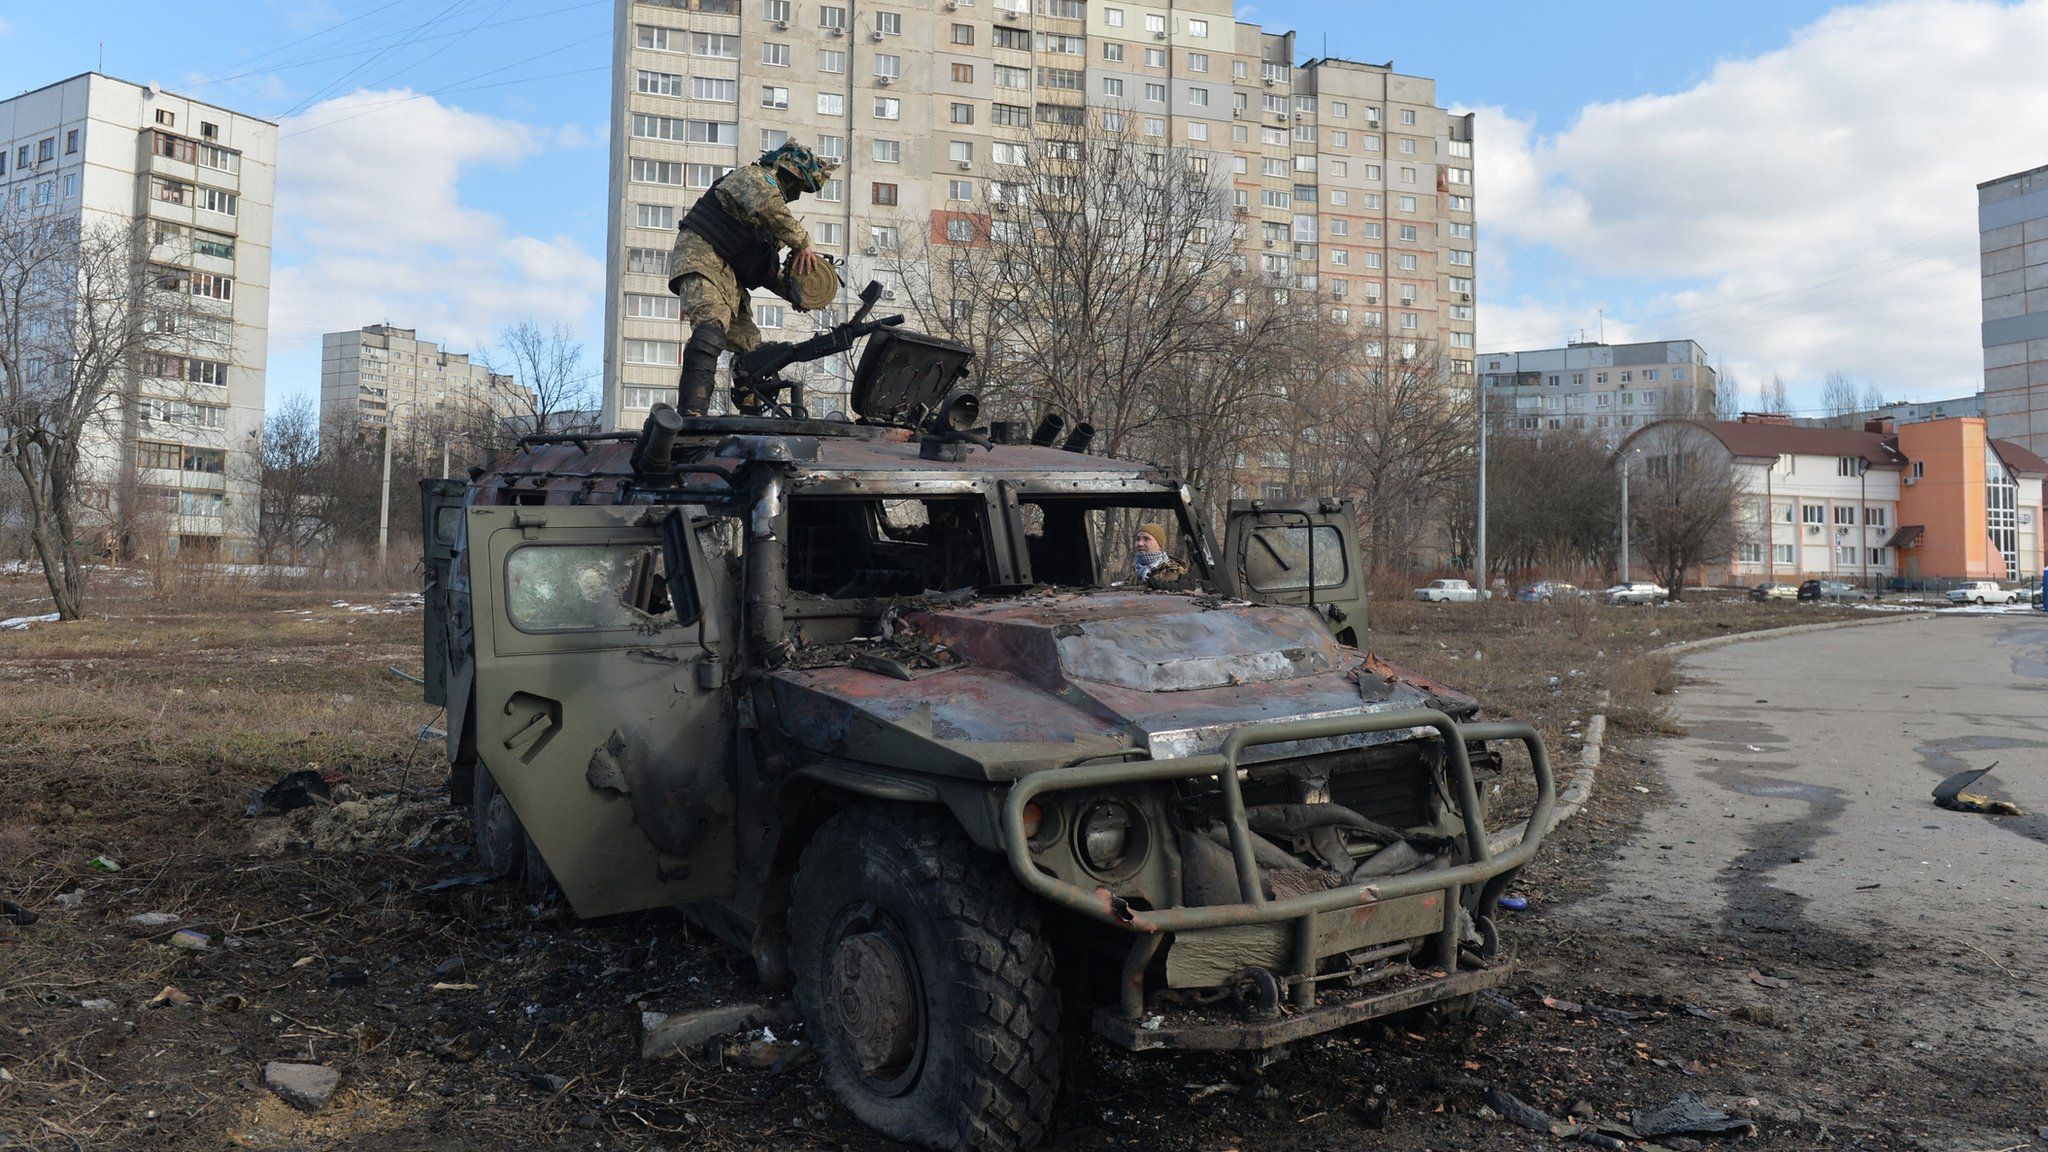 An Ukrainian Territorial Defence fighter examines a destroyed Russian infantry mobility vehicle GAZ Tigr after the fight in Kharkiv on February 27, 2022